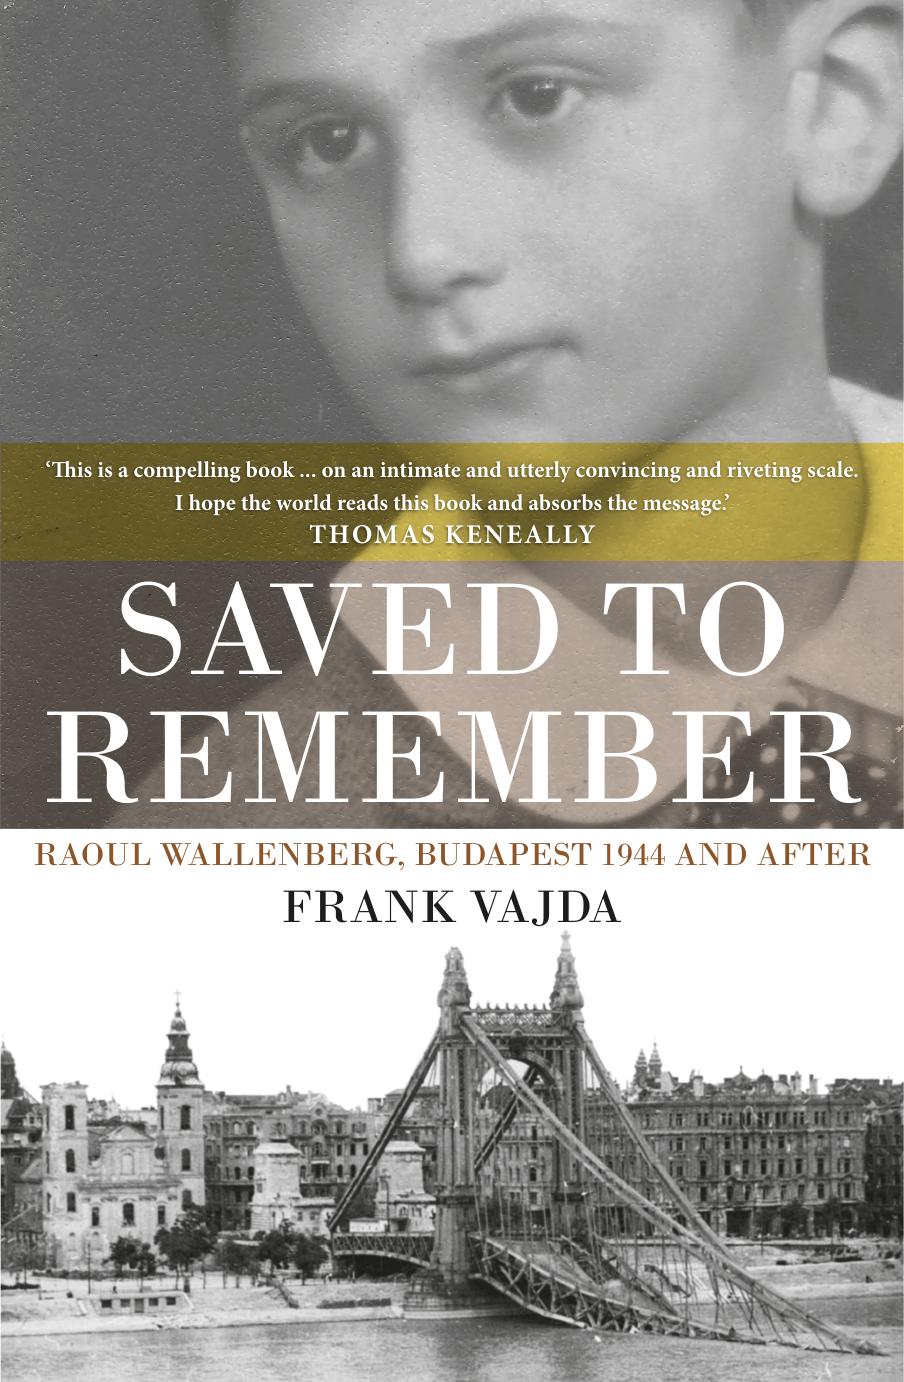 Saved to Remember : Raoul Wallenberg, Budapest 1944 and After by Frank Vajda